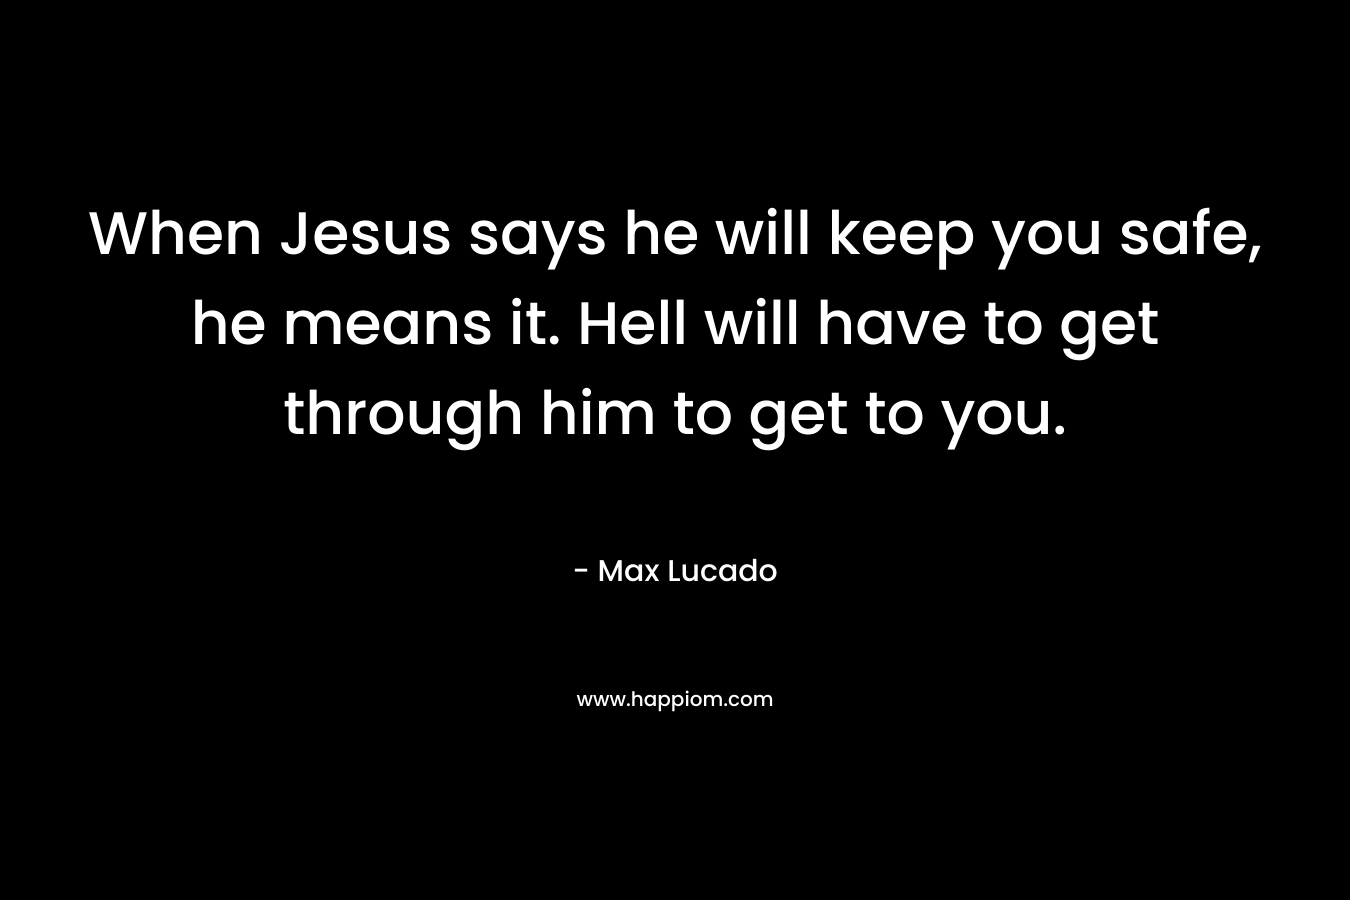 When Jesus says he will keep you safe, he means it. Hell will have to get through him to get to you.